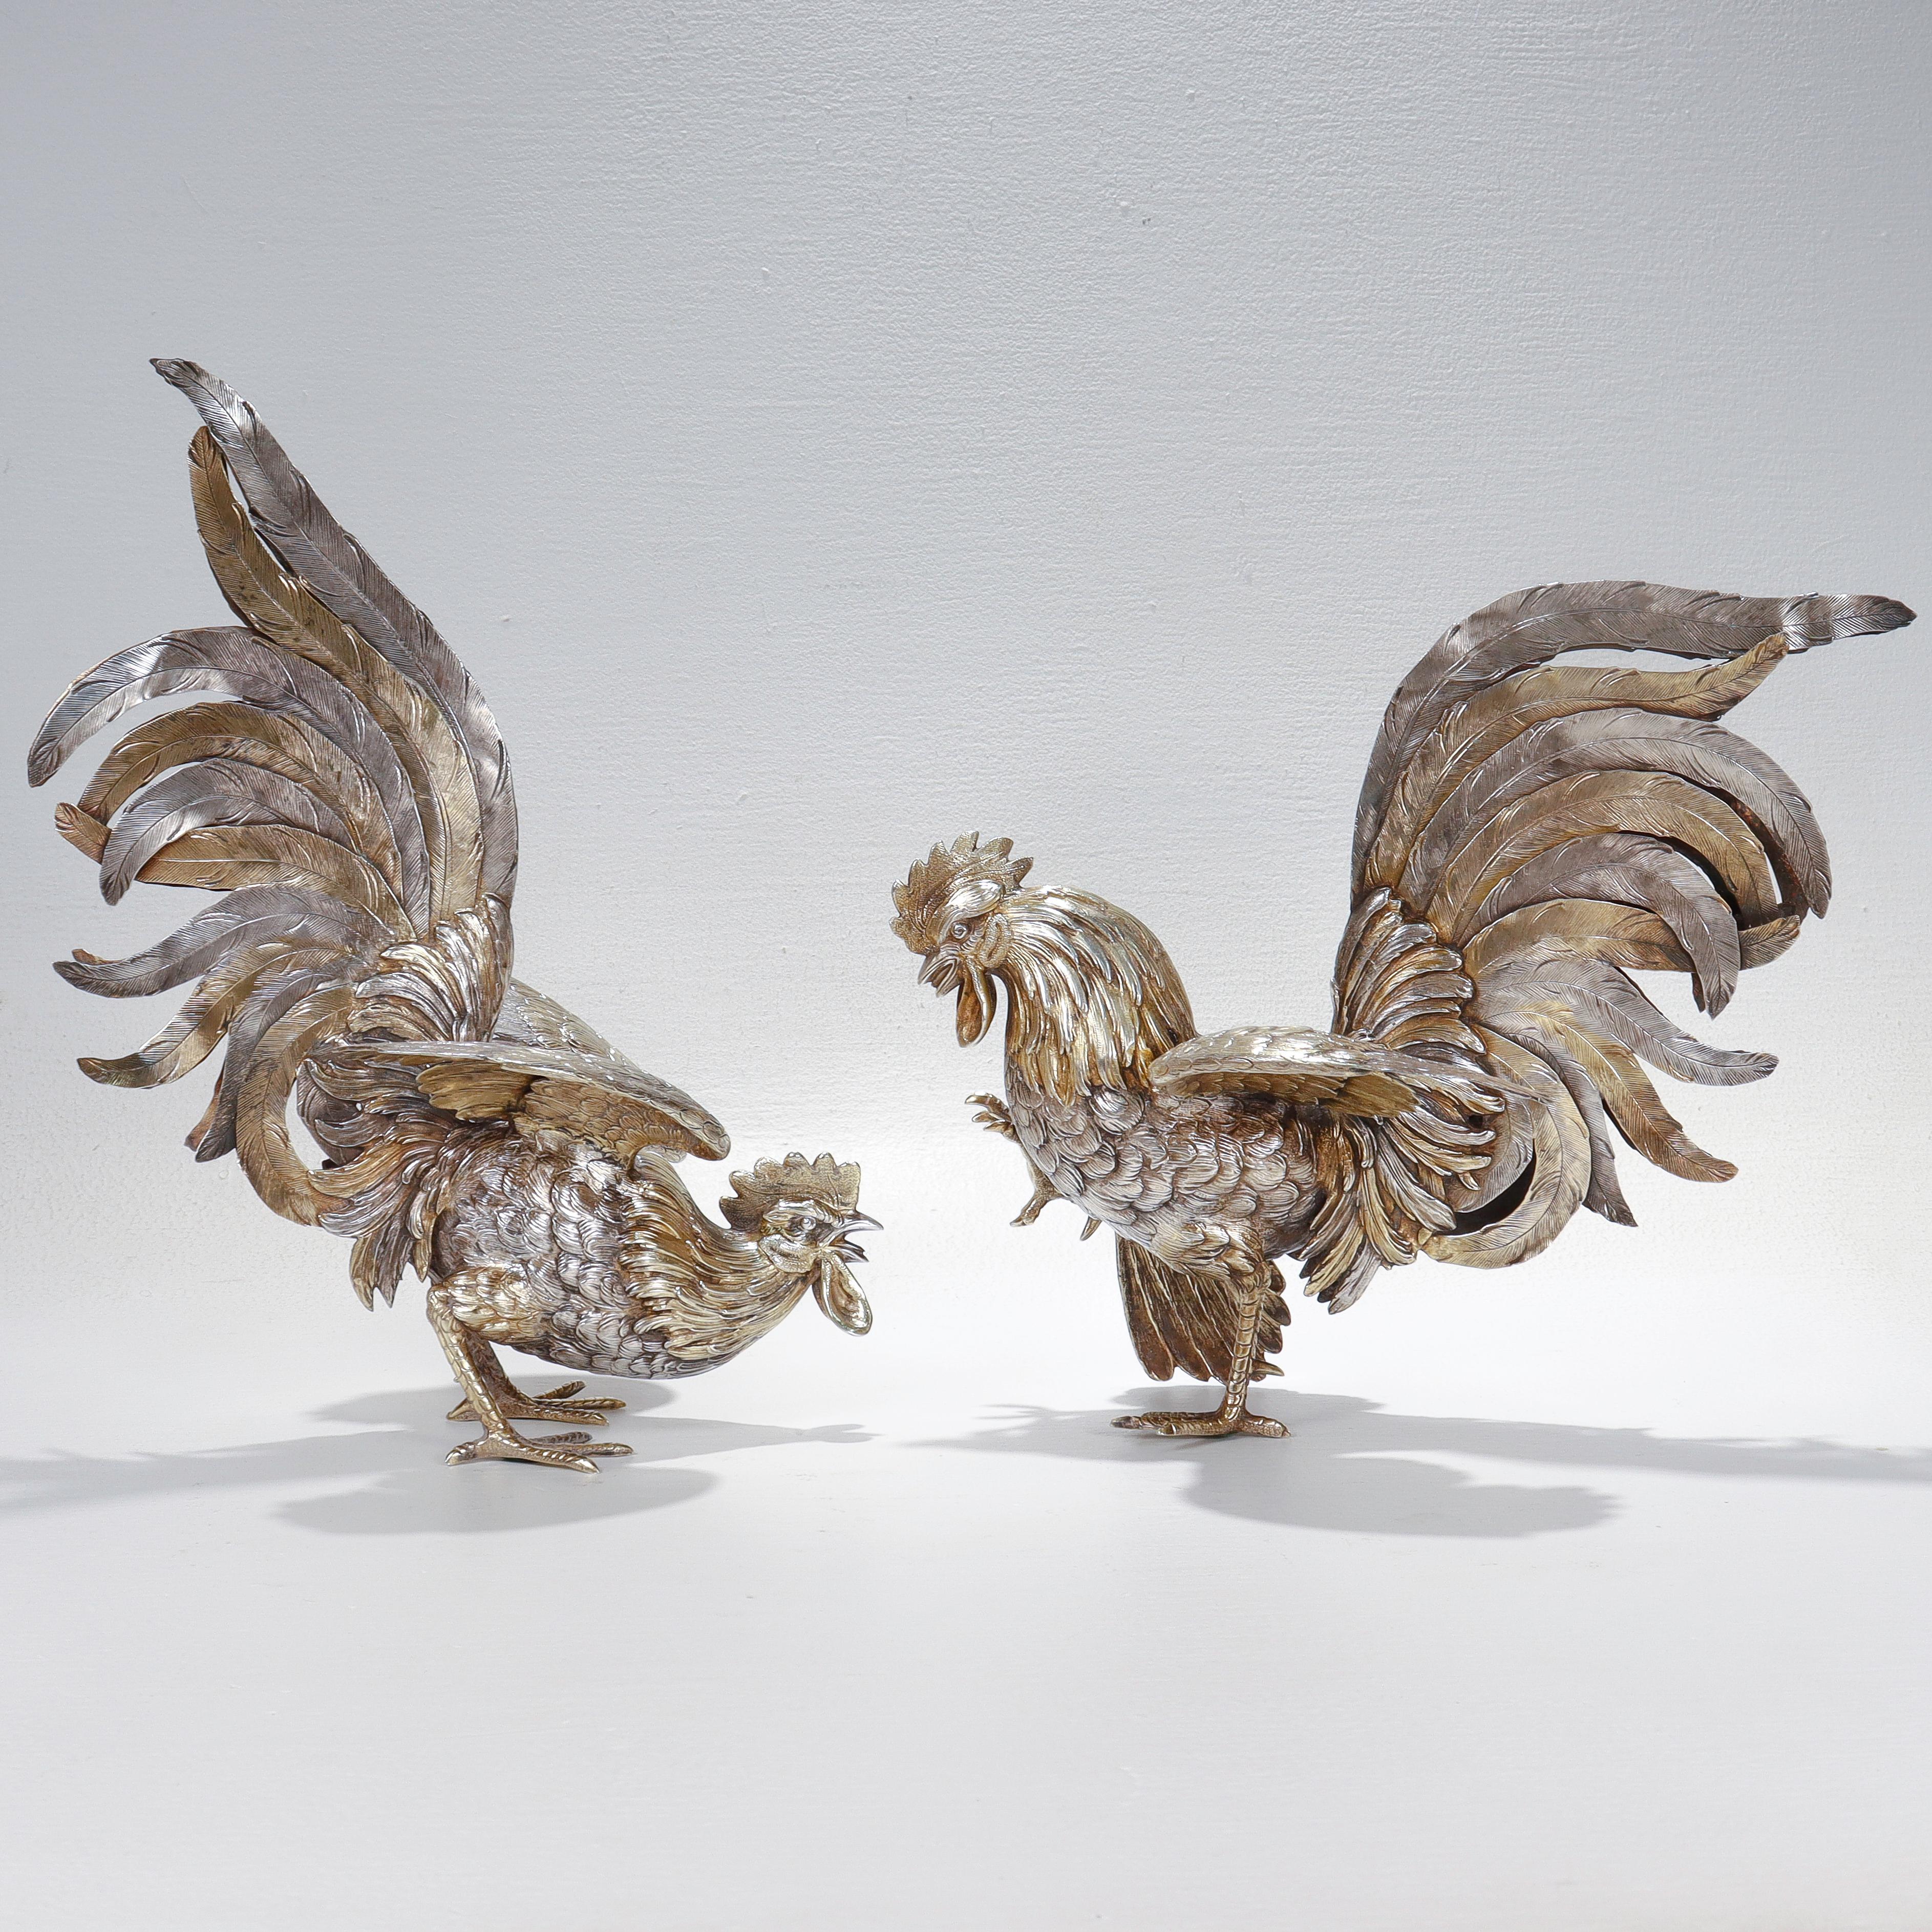 A fine pair of large fighting cockerel or rooster table ornaments.

Marked for Israel Freeman & Son.

In sterling silver with gilding throughout.

With finely cast & engraved details to the bodies.

Hallmarked to the feet.

Simply top level silver